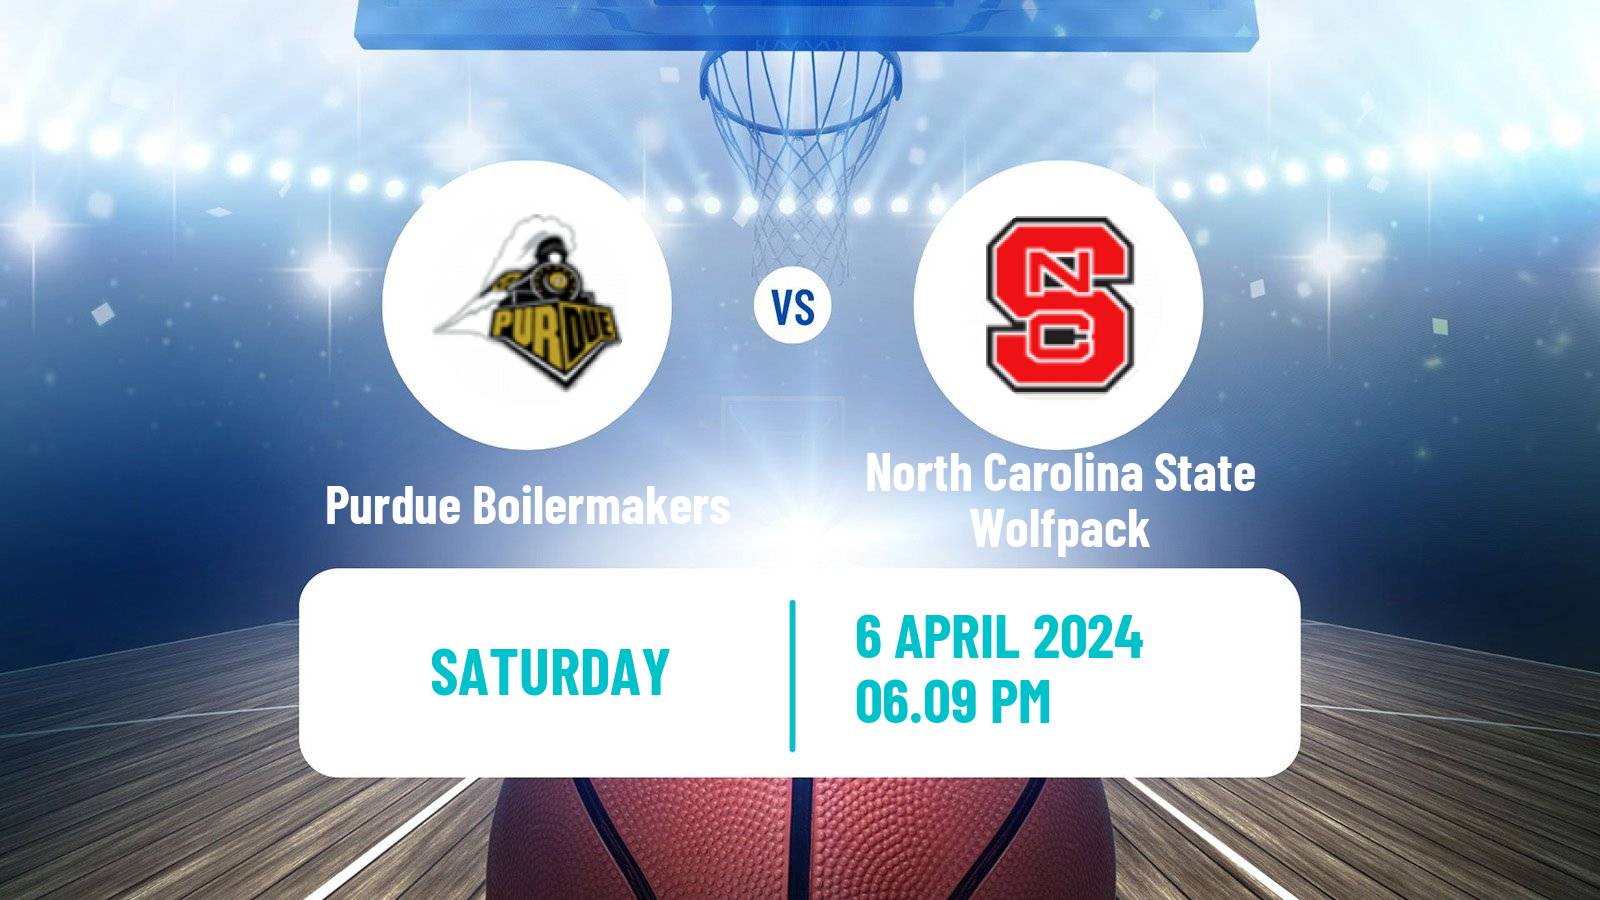 Basketball NCAA College Basketball Purdue Boilermakers - North Carolina State Wolfpack